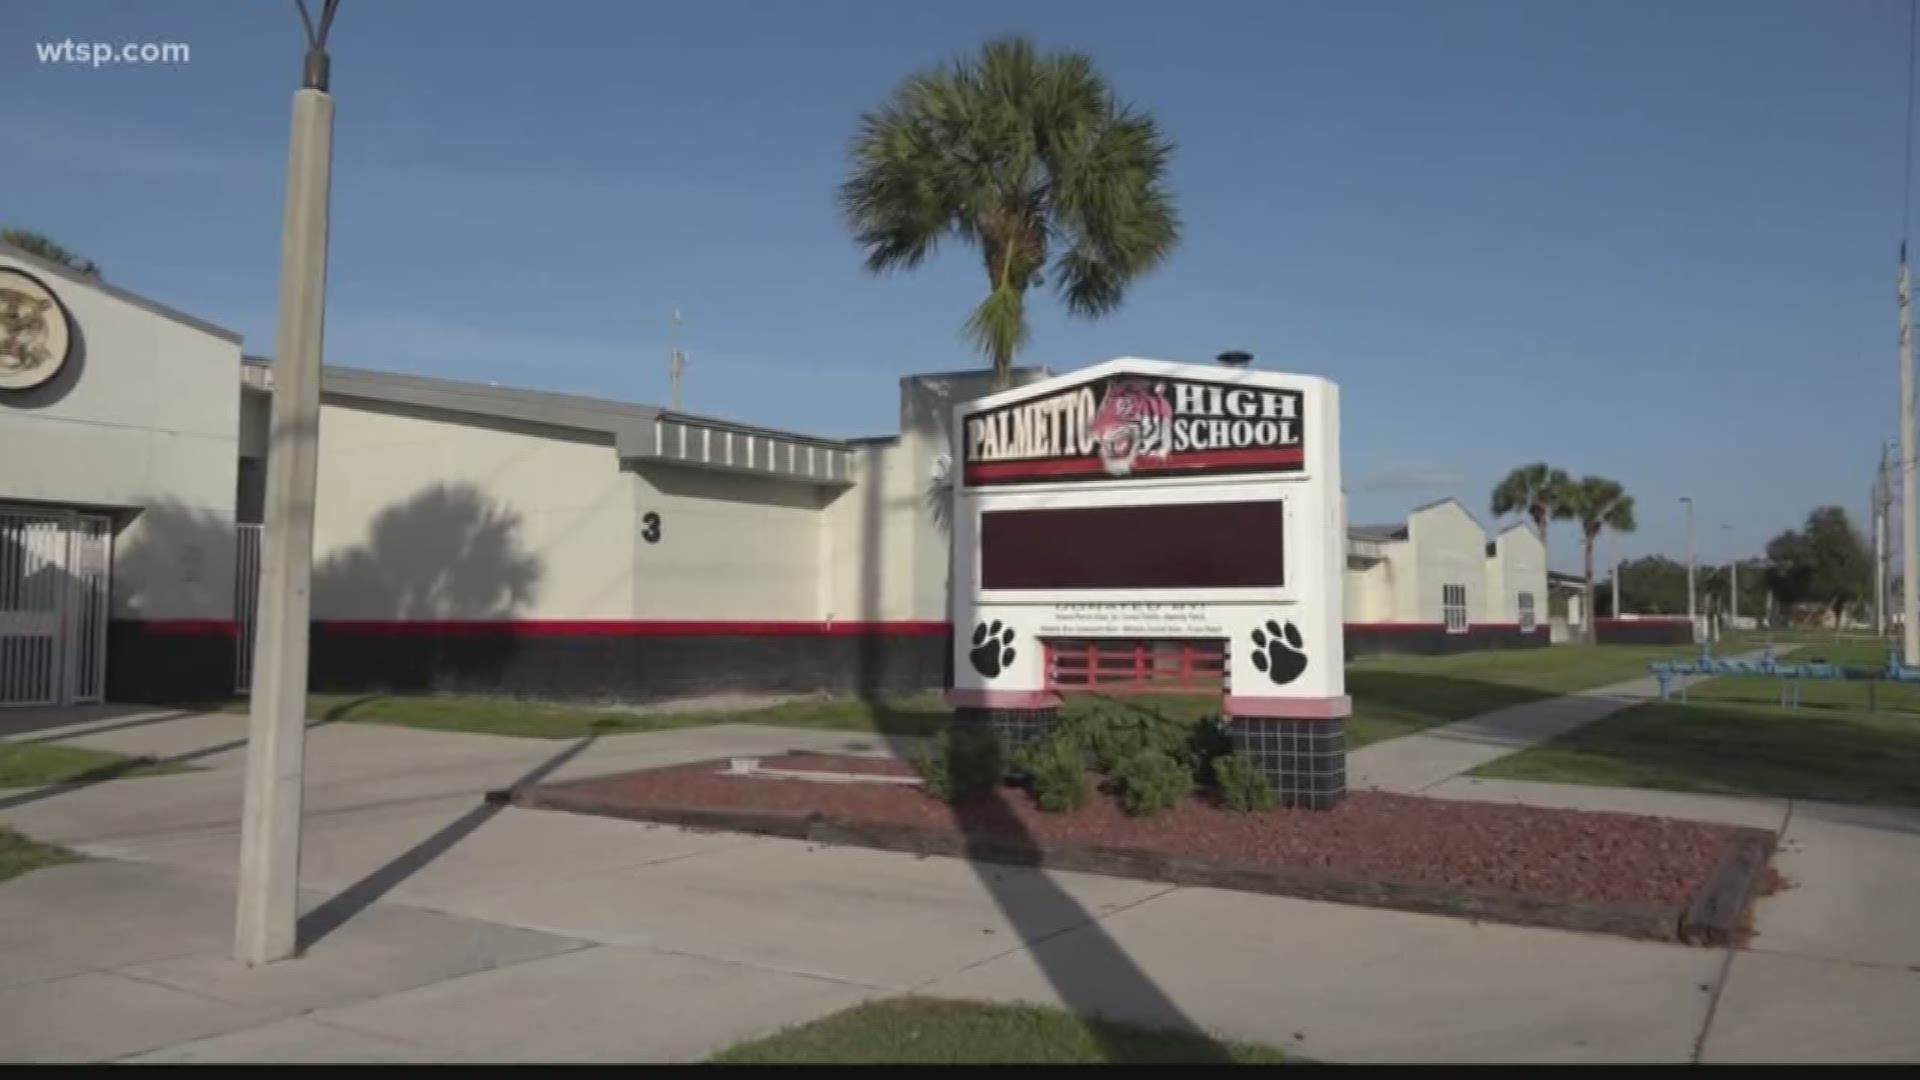 Students are demanding the Manatee County school do something to fix the flooding problem.